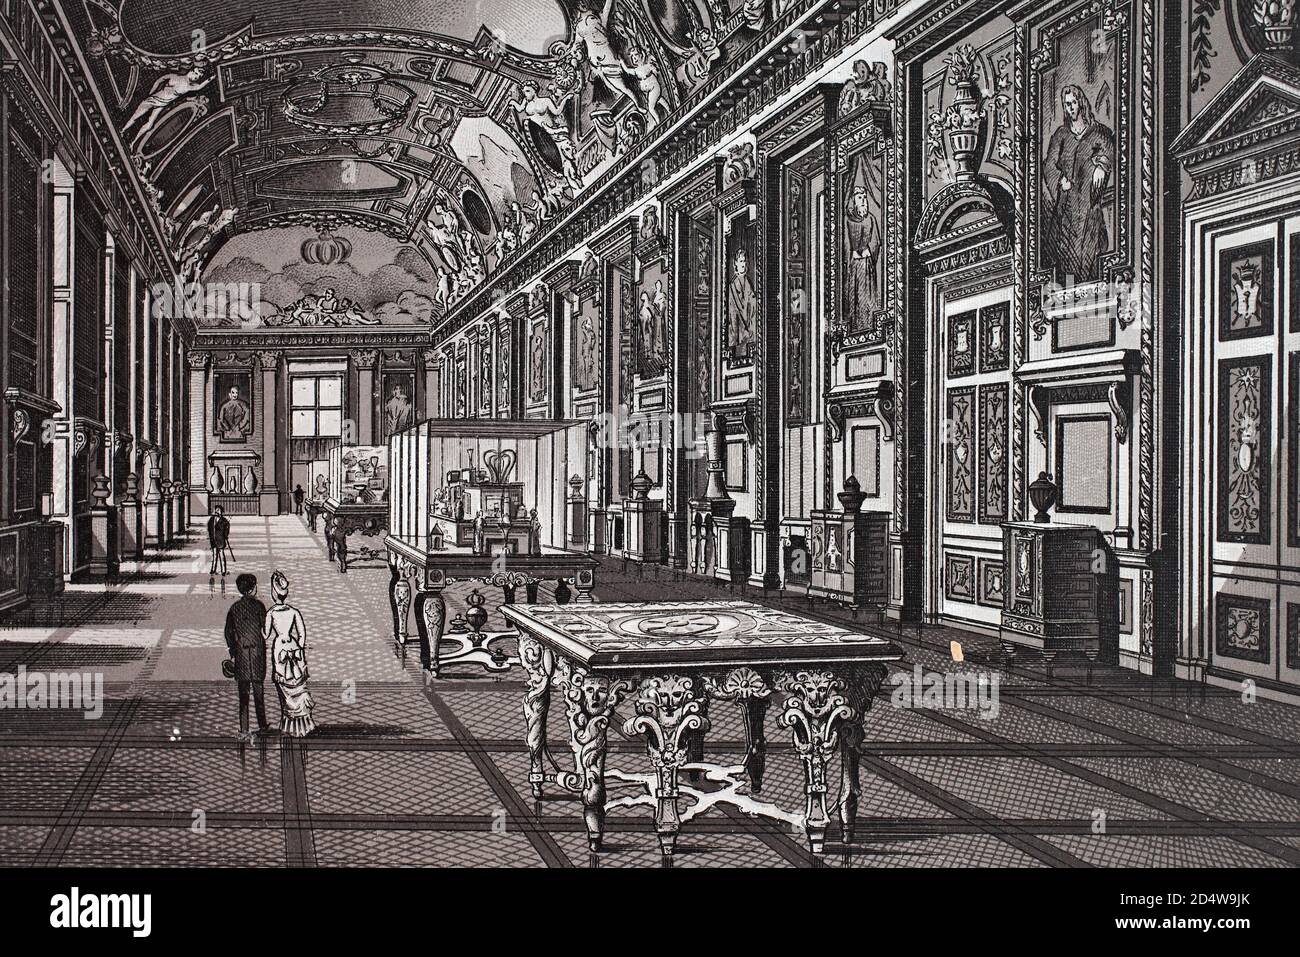 Paris, Louvre, Galerie d'Apollon, France, historic copper-plate etching from 1860 Stock Photo